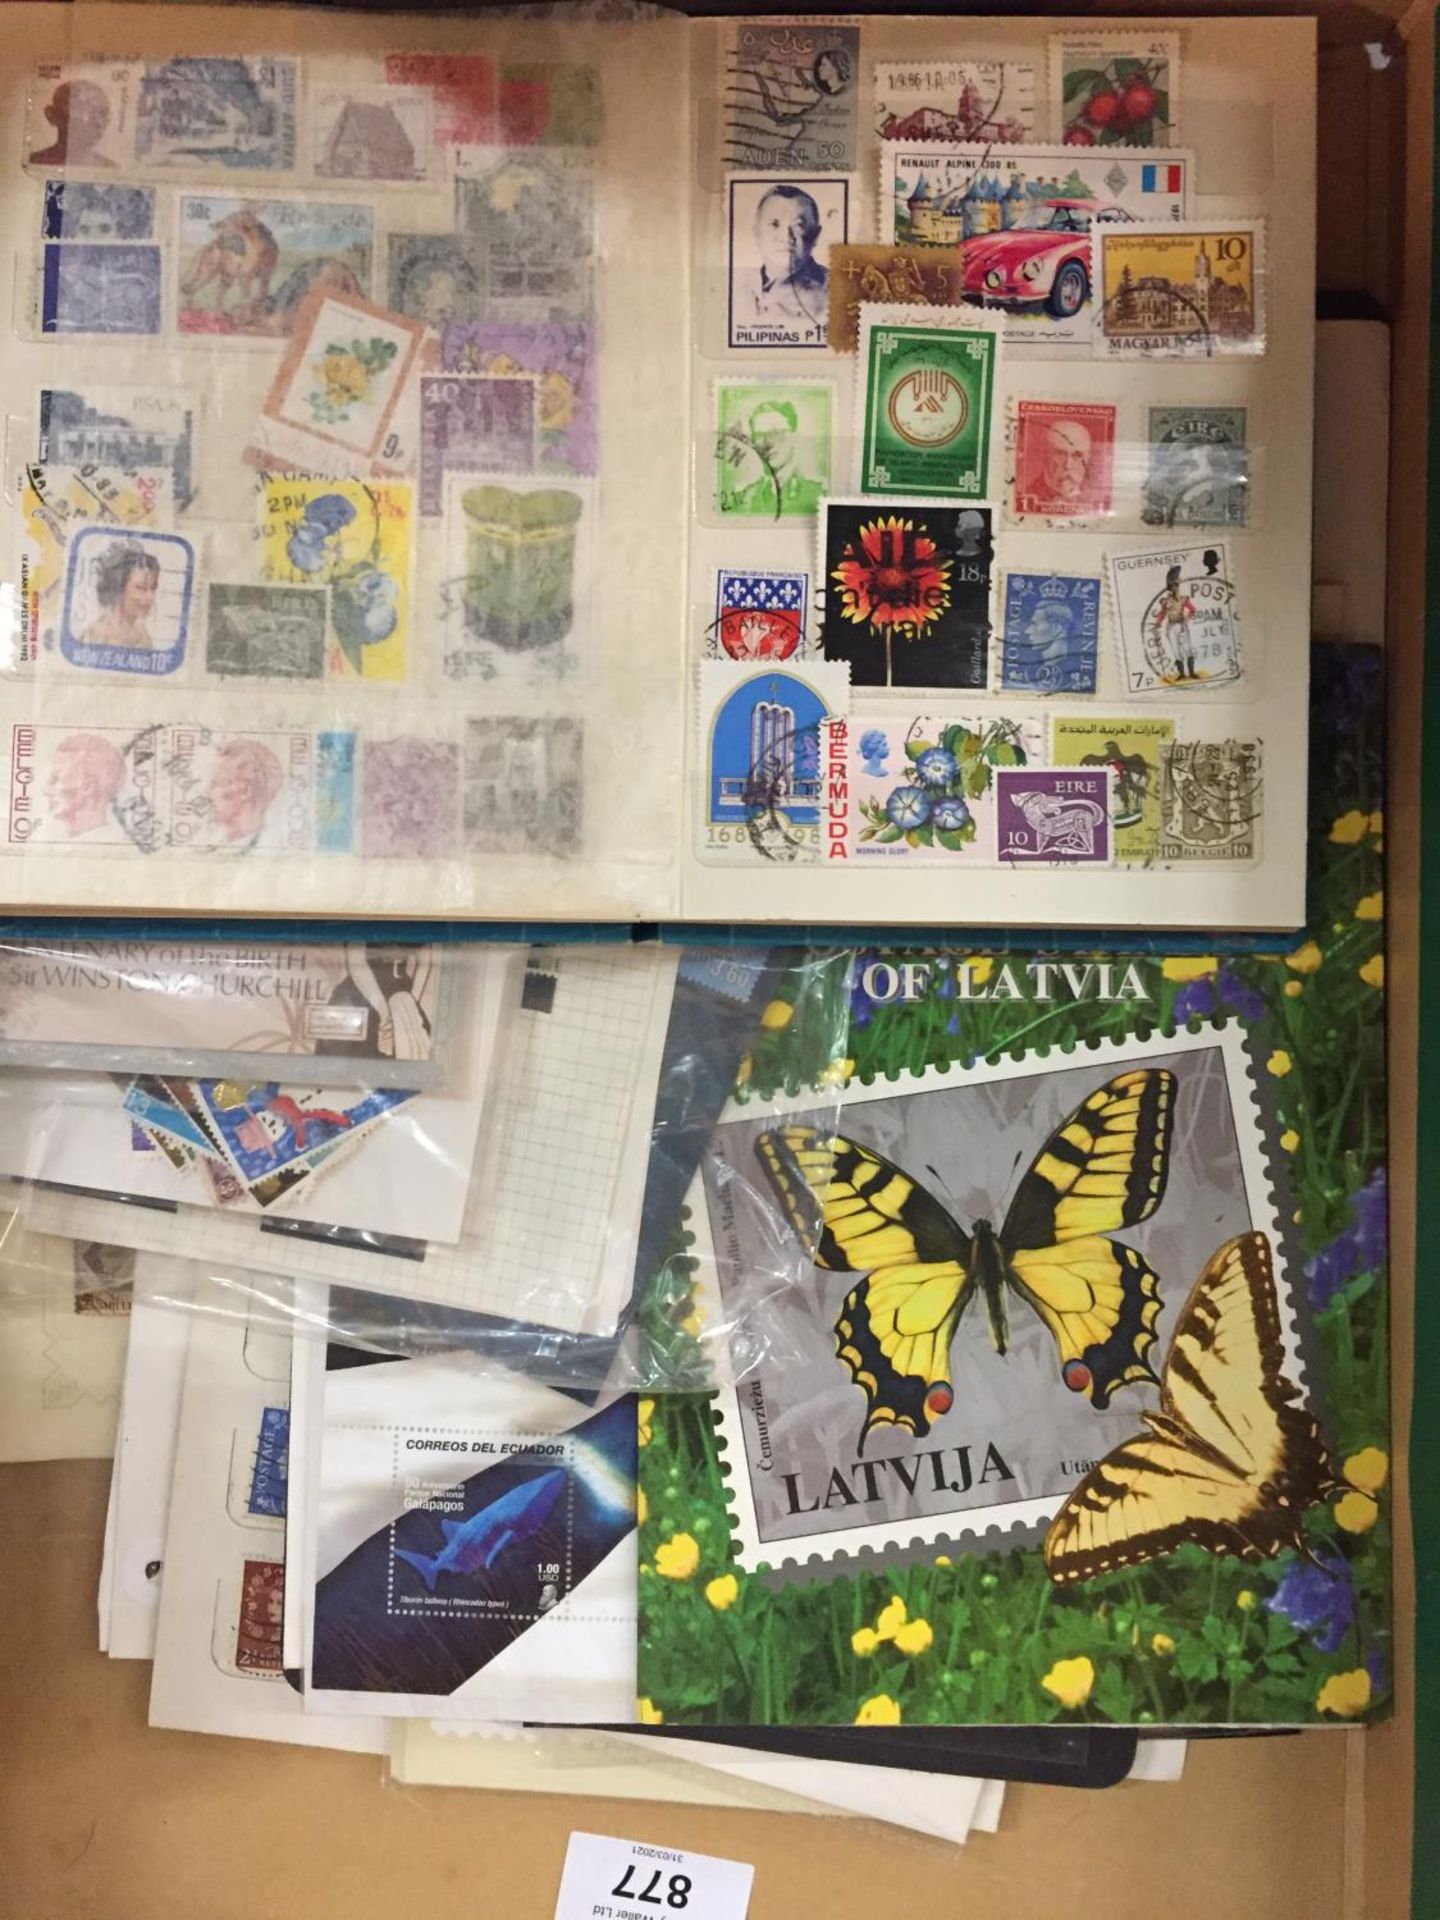 A COLLECTION OF VARIOUS STAMPS, CIGARETTE CARDS AND GERMAN BANK NOTES - Image 3 of 6